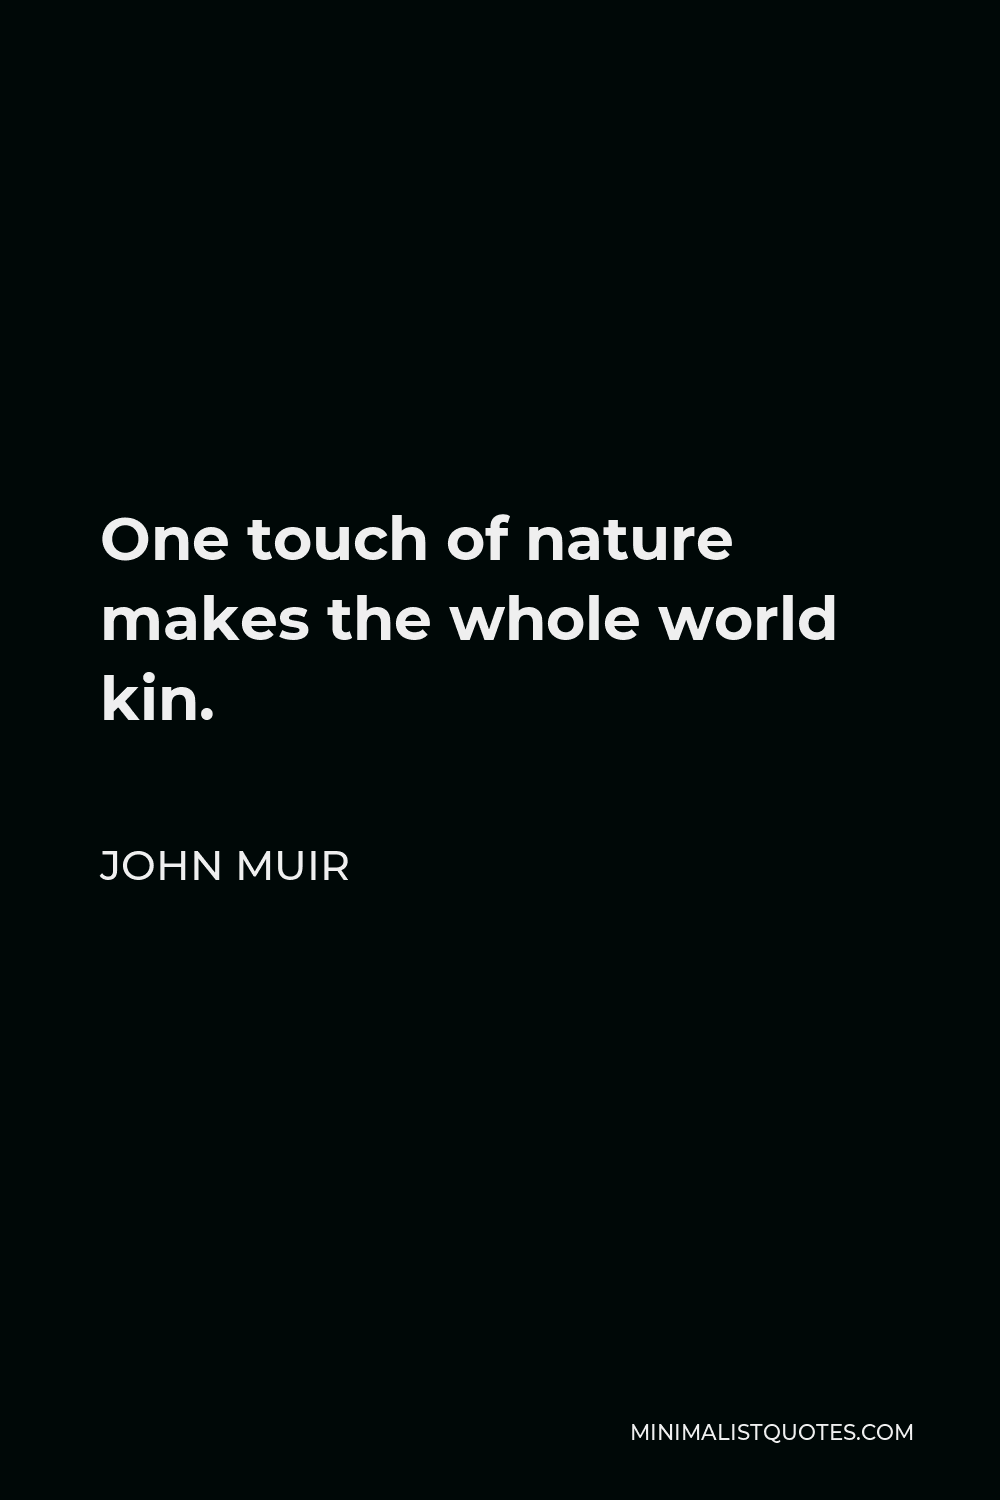 John Quote: touch nature makes the whole world kin.